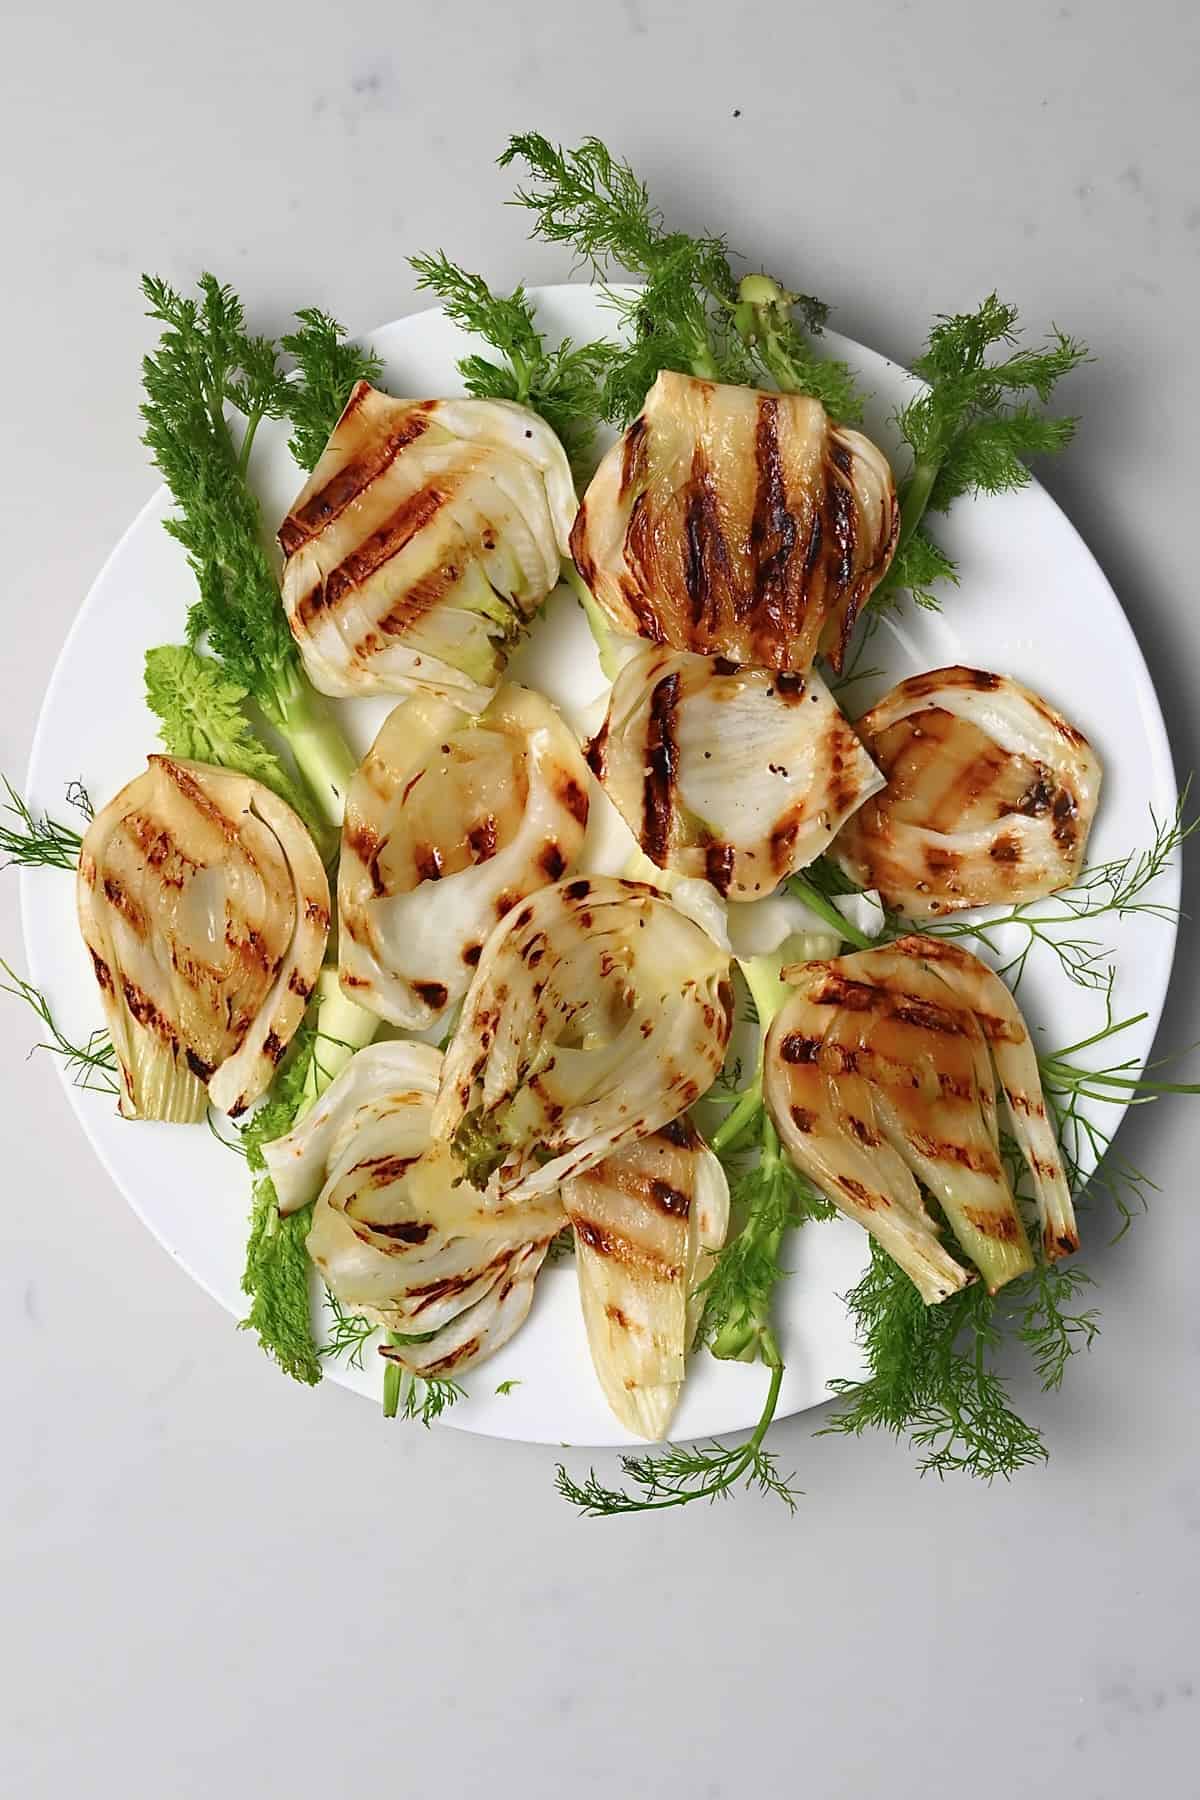 Grilled fennel on a plate